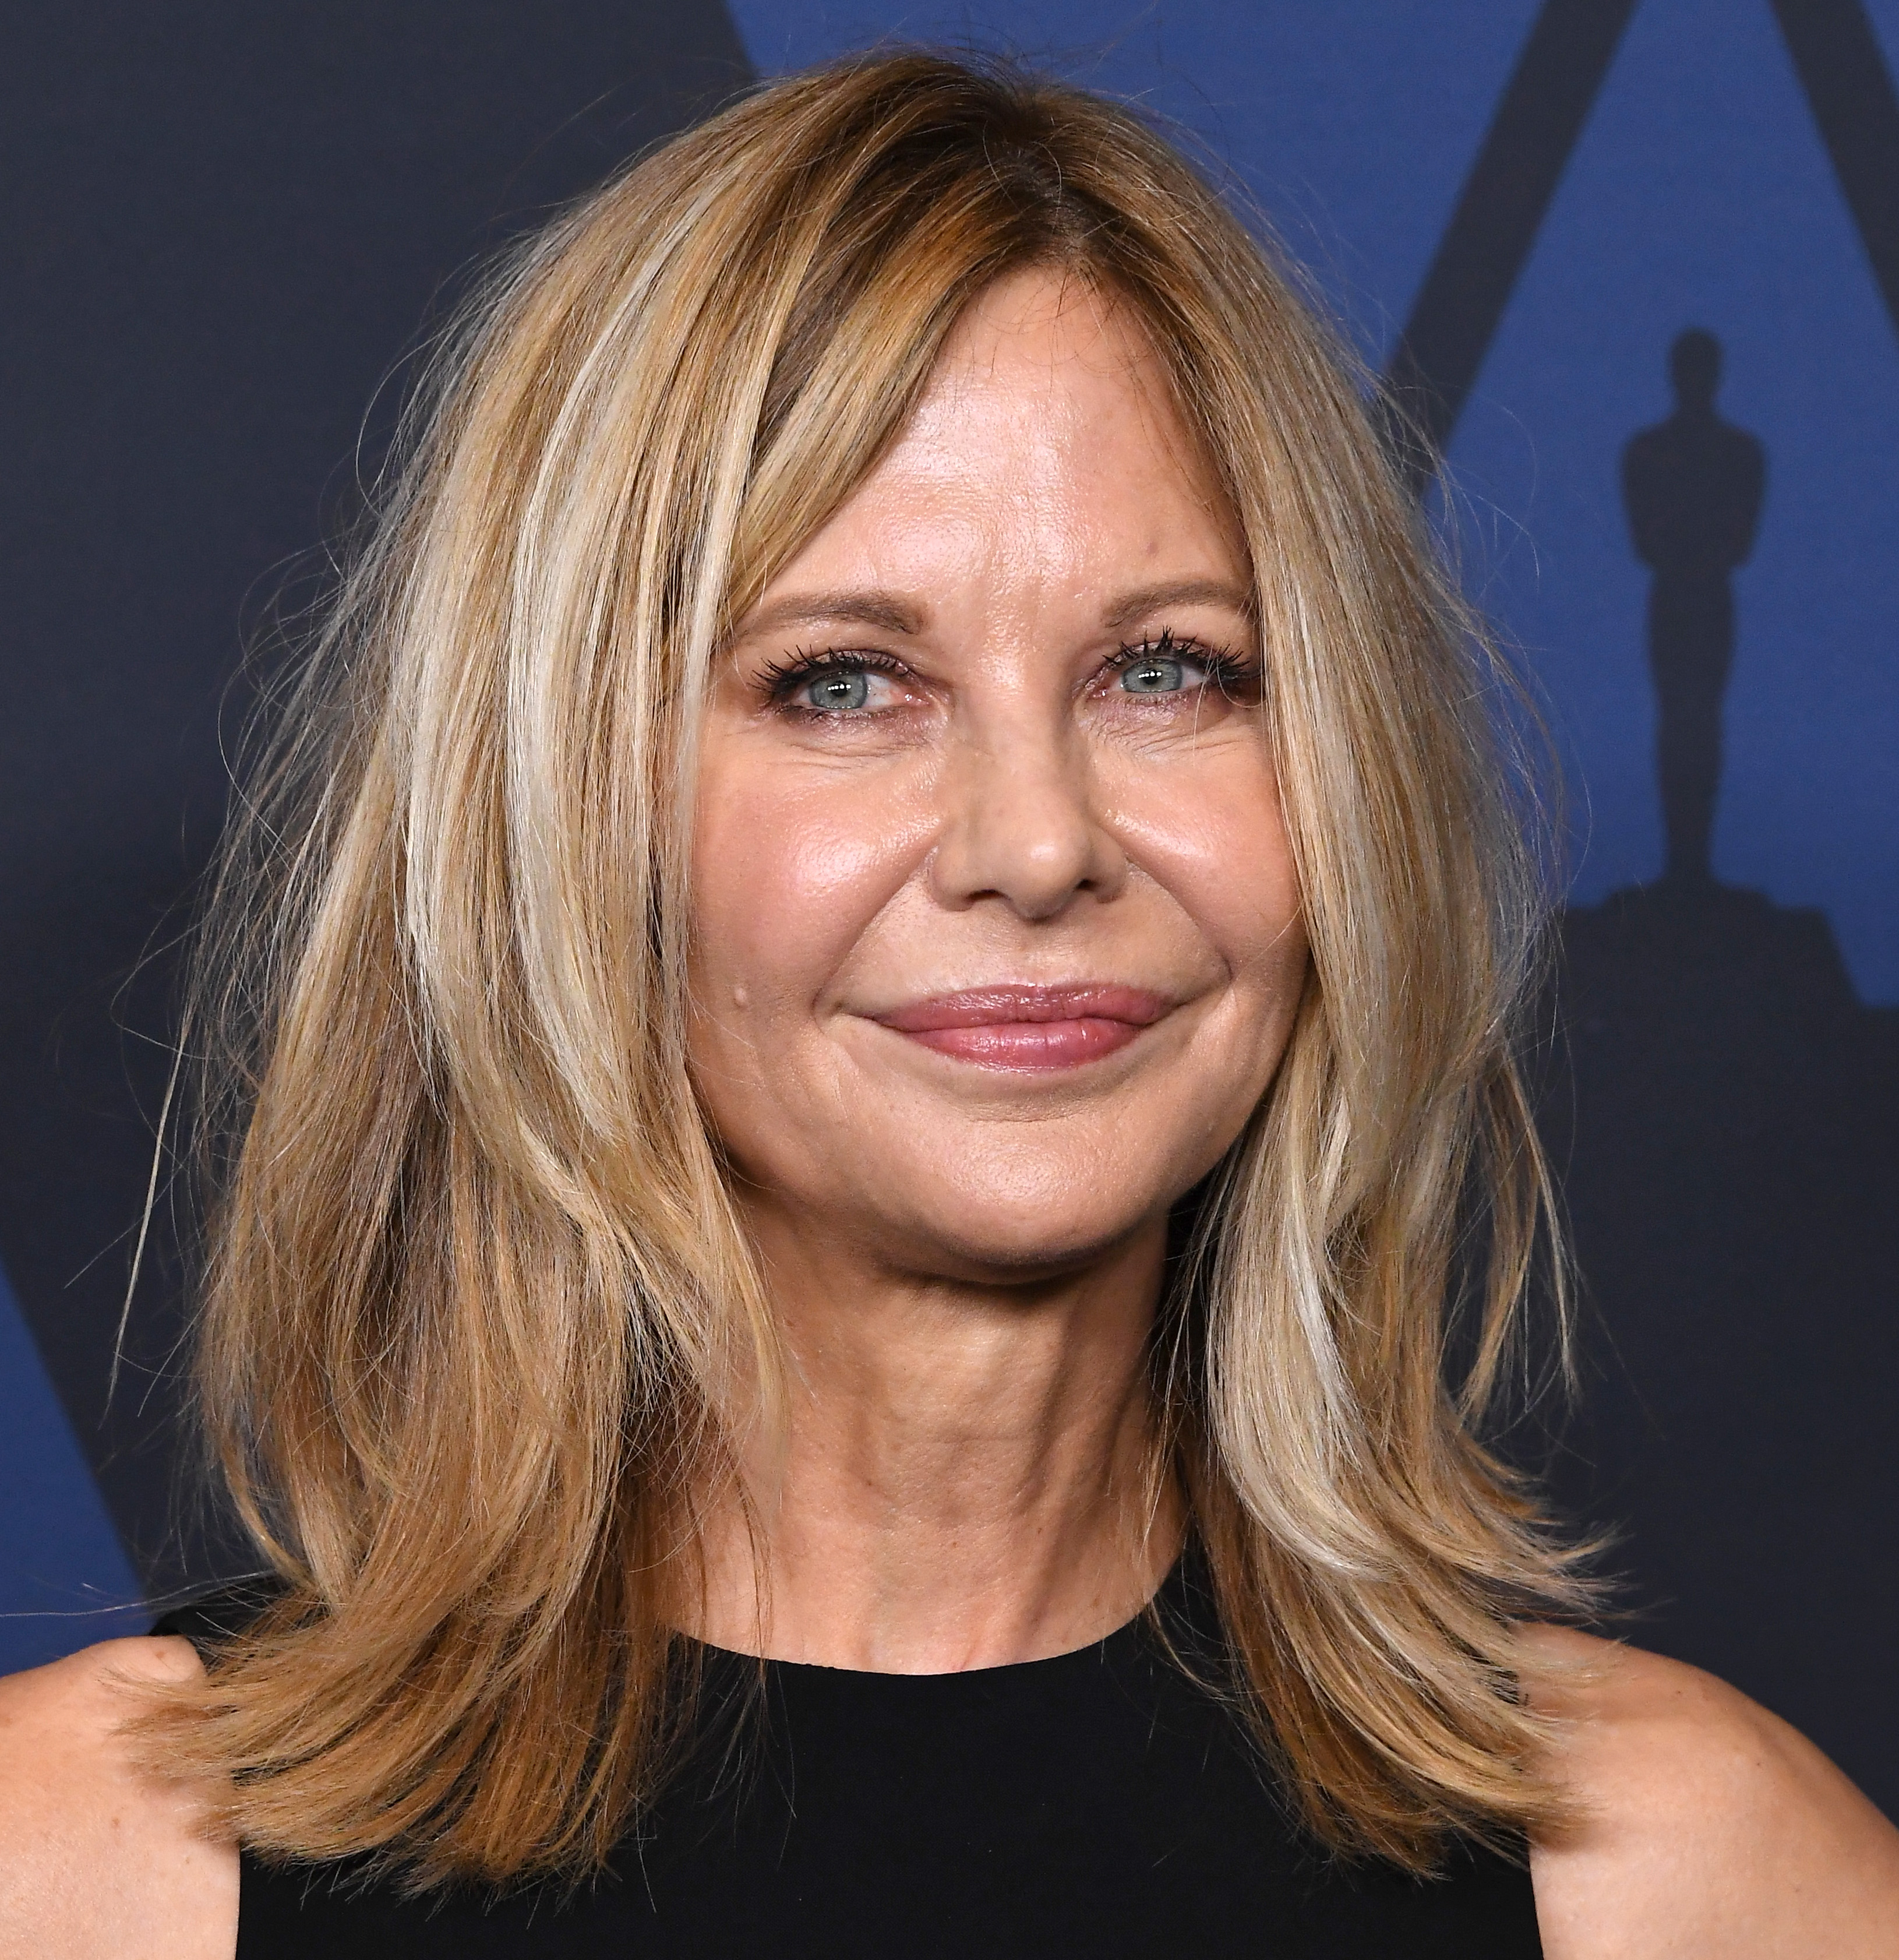 Meg Ryan at the Academy Of Motion Picture Arts And Sciences' 11th Annual Governors Awards on October 27, 2019 in Hollywood, California. | Source: Getty Images